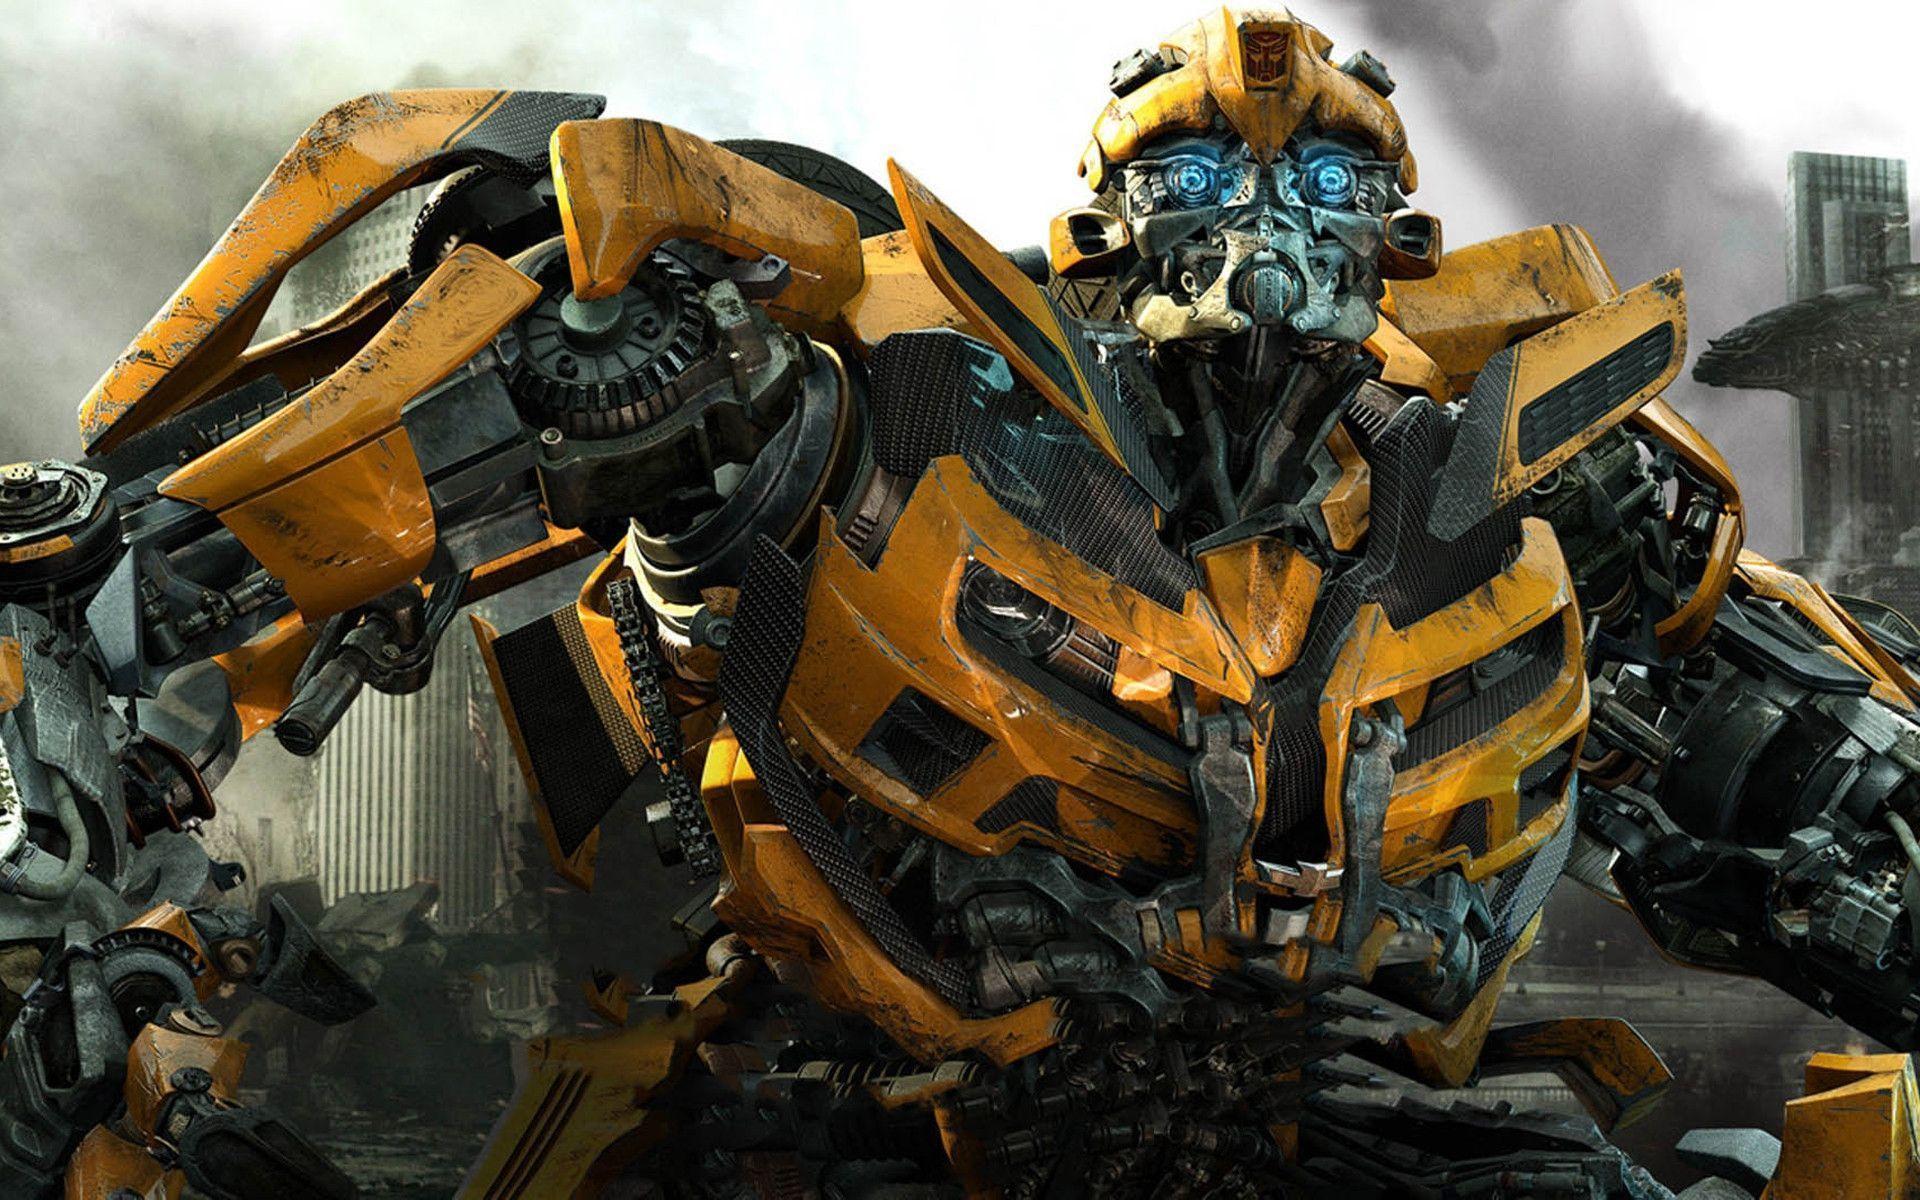 Featured image of post Wallpaper Bumblebee Transformer 1920 1200 bumblebee wallpaper transformers 1280 1024 transformer bumblebee wallpapers 44 wallpapers adorable wallpapers